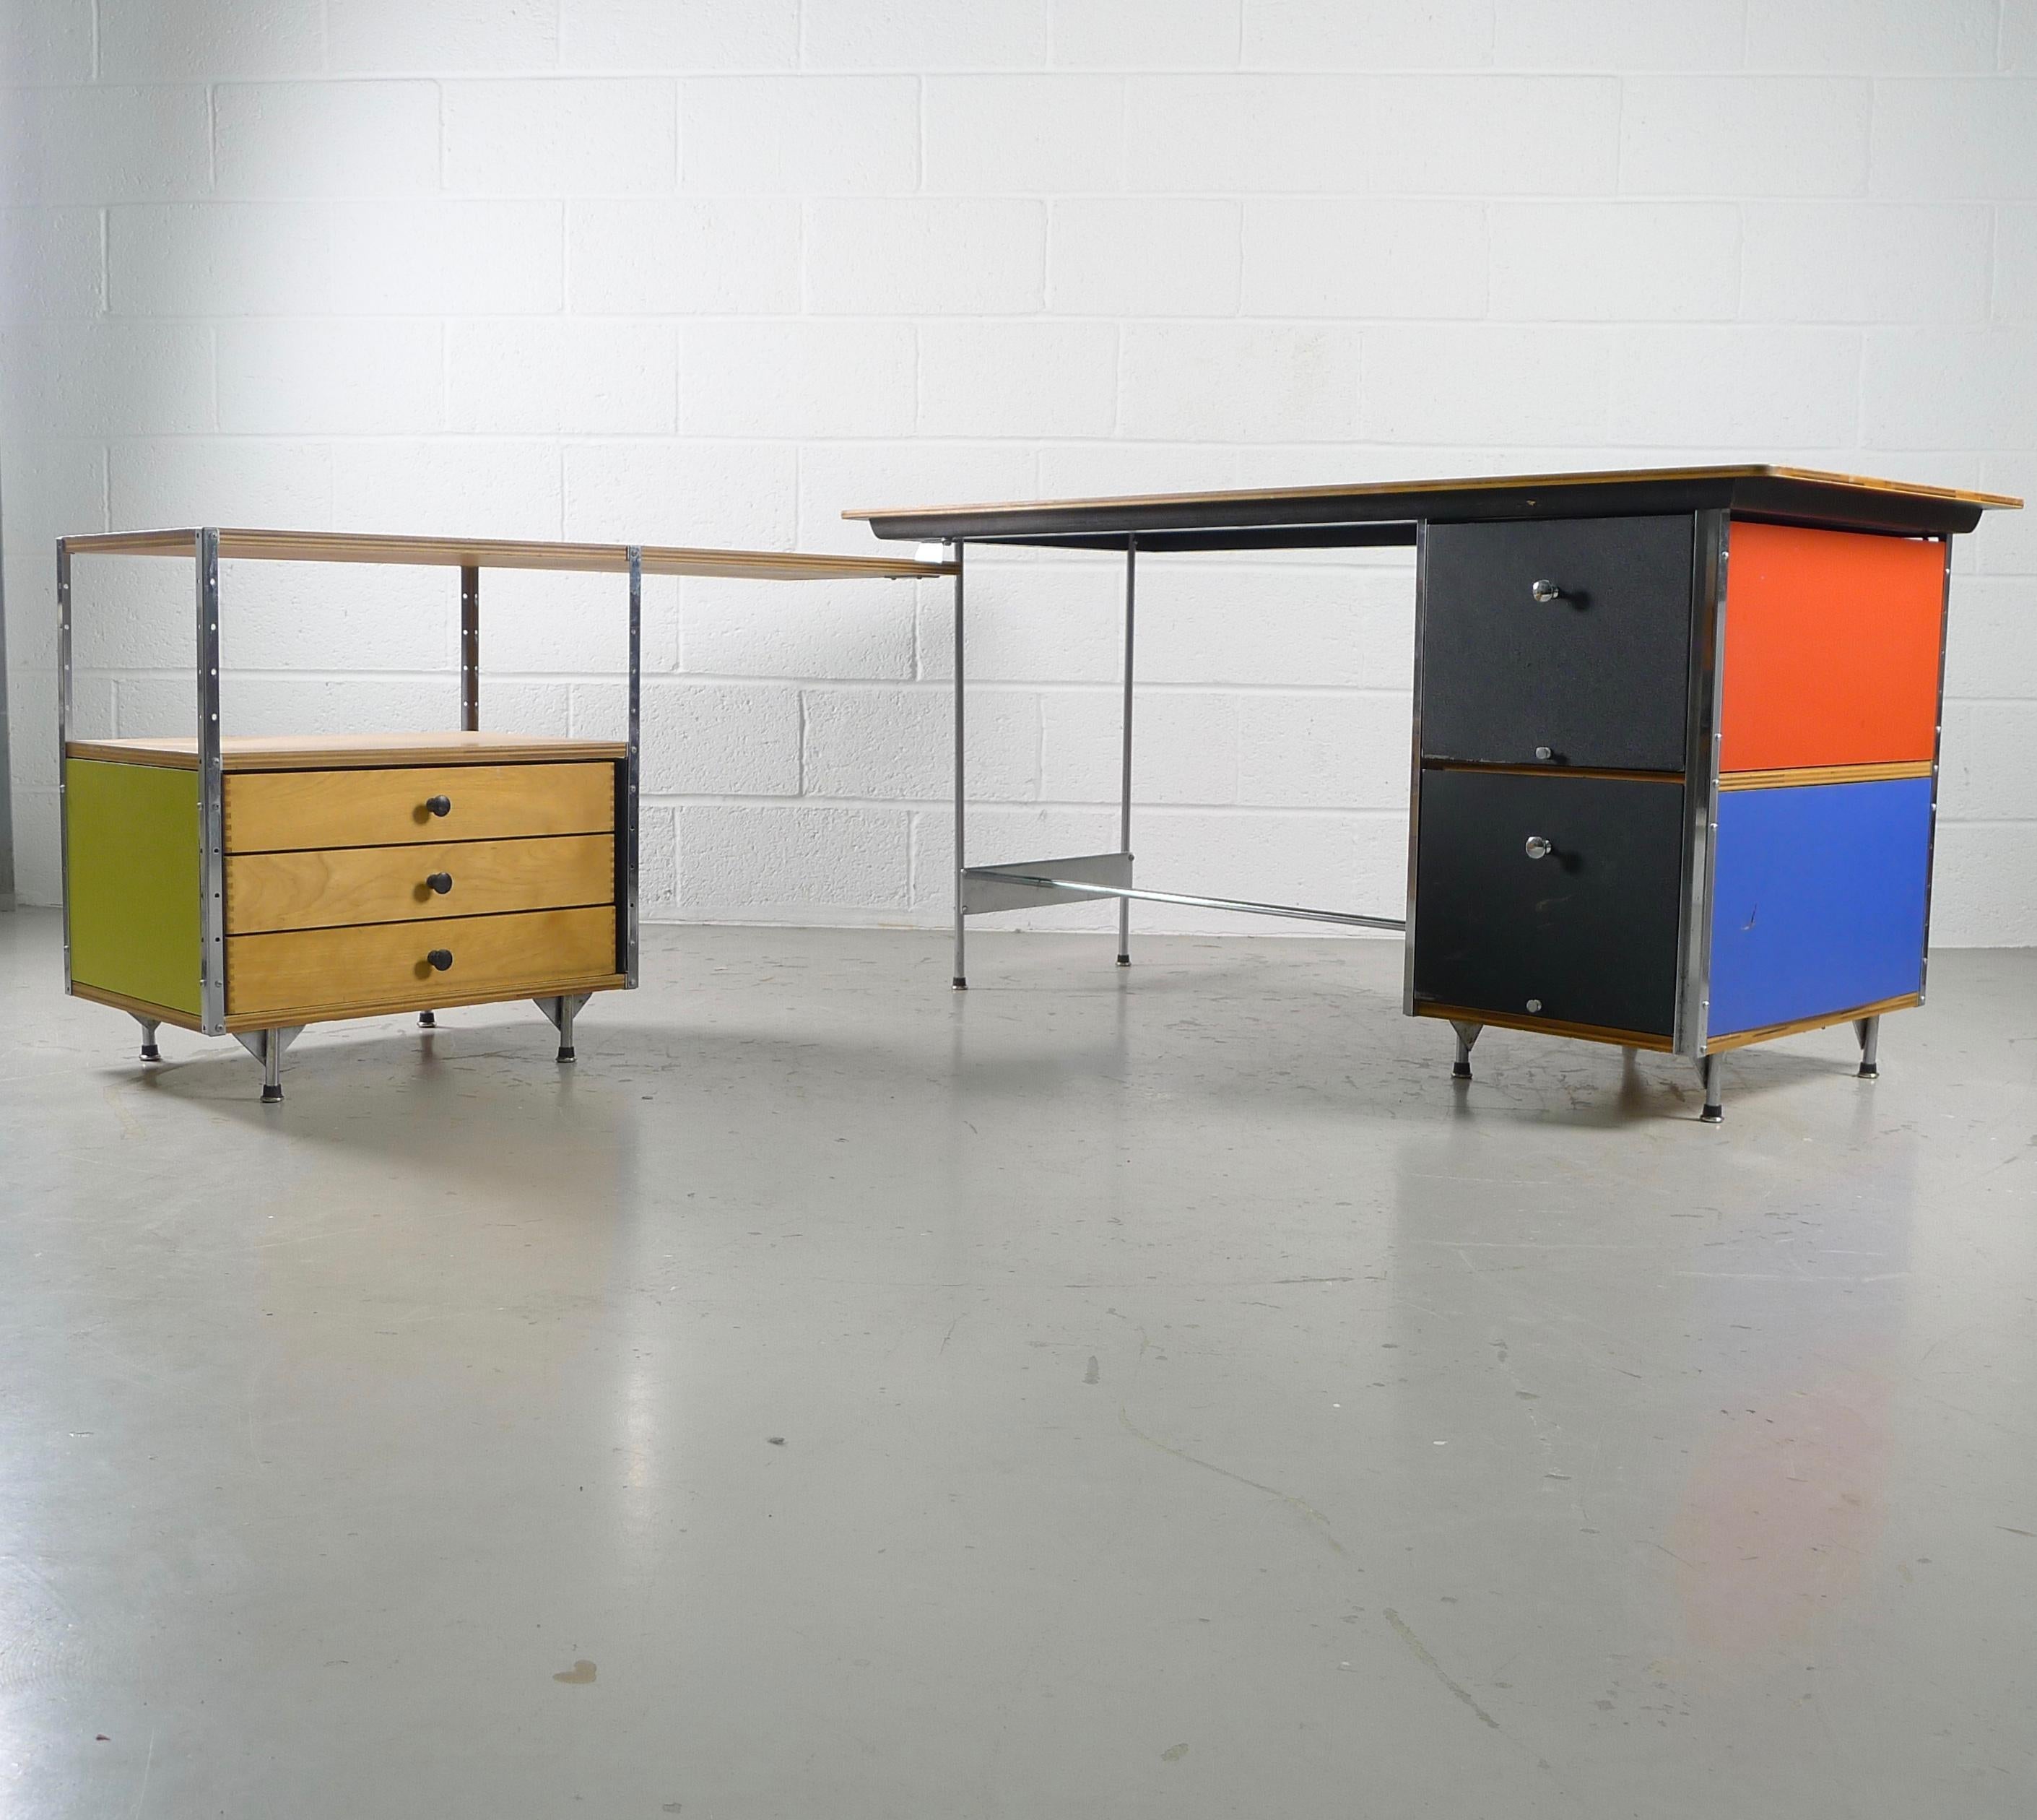 Charles and Ray Eames for Herman Miller, USA. An all original ESU desk and return. Birch ply tops, colored panels, original drawer pulls and boot glides. The shape can be changed by simply pivoting the return sections desired.

Second series